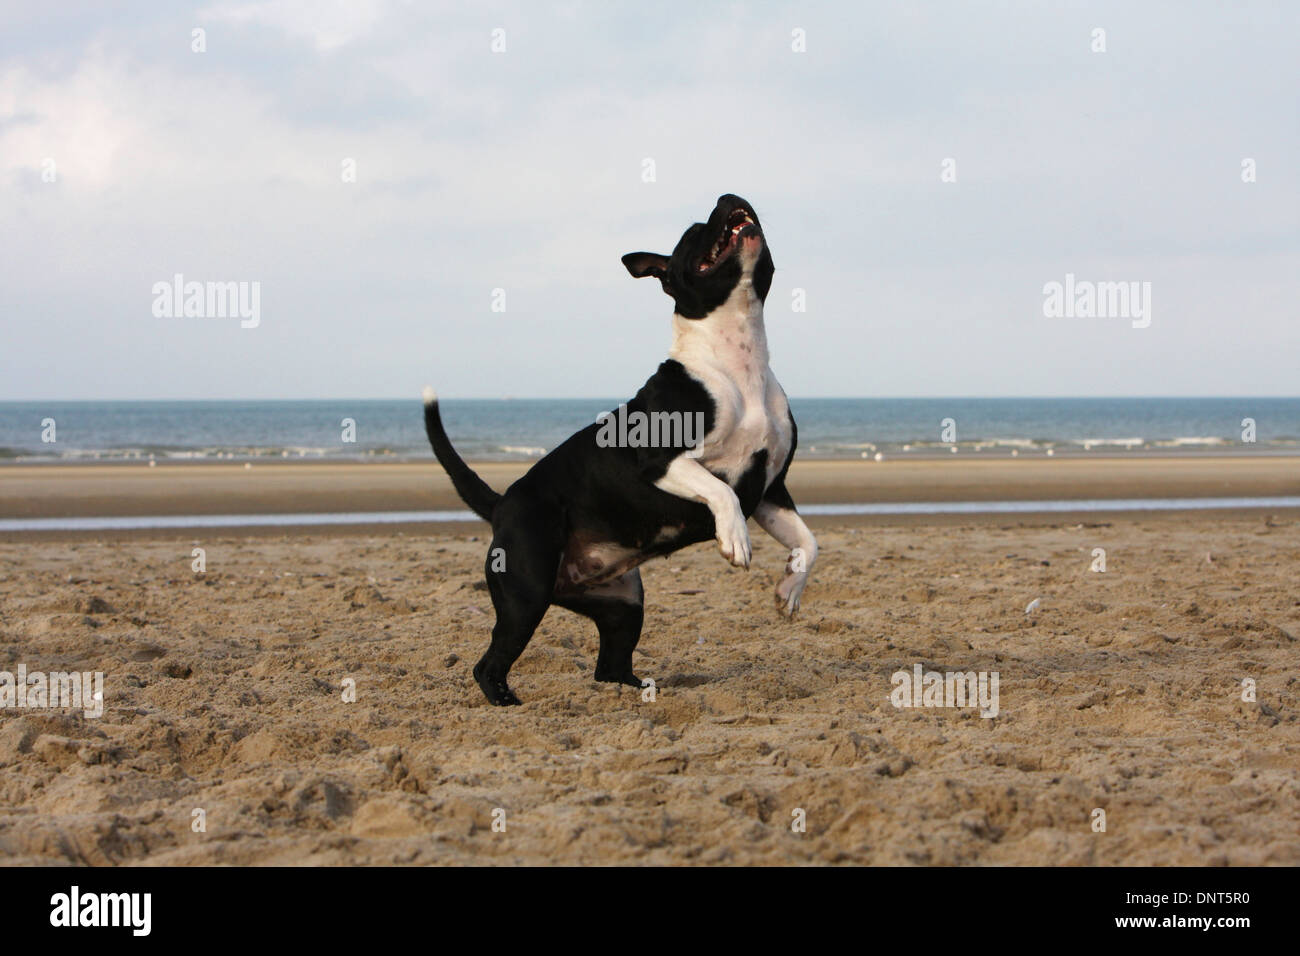 dog Staffordshire Bull Terrier / Staffie   adult standing on the beach Stock Photo